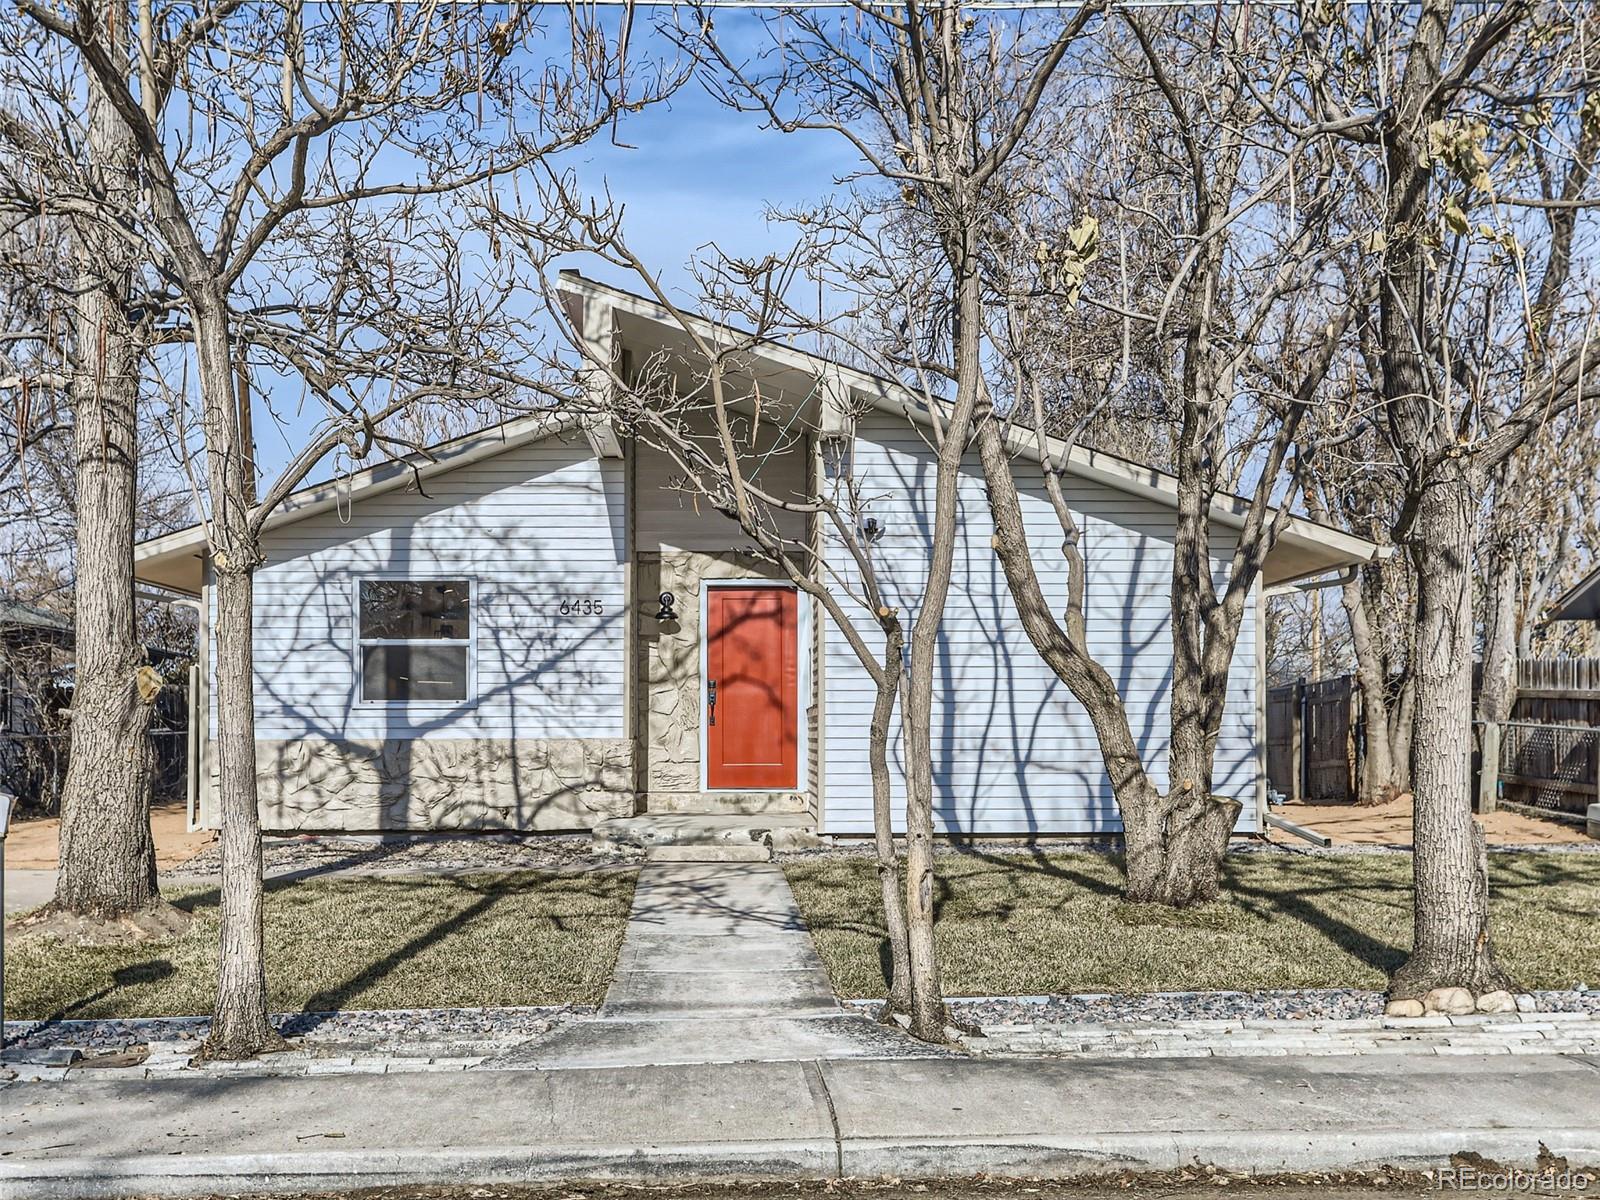 Report Image for 6435 E 65th Place,Commerce City, Colorado